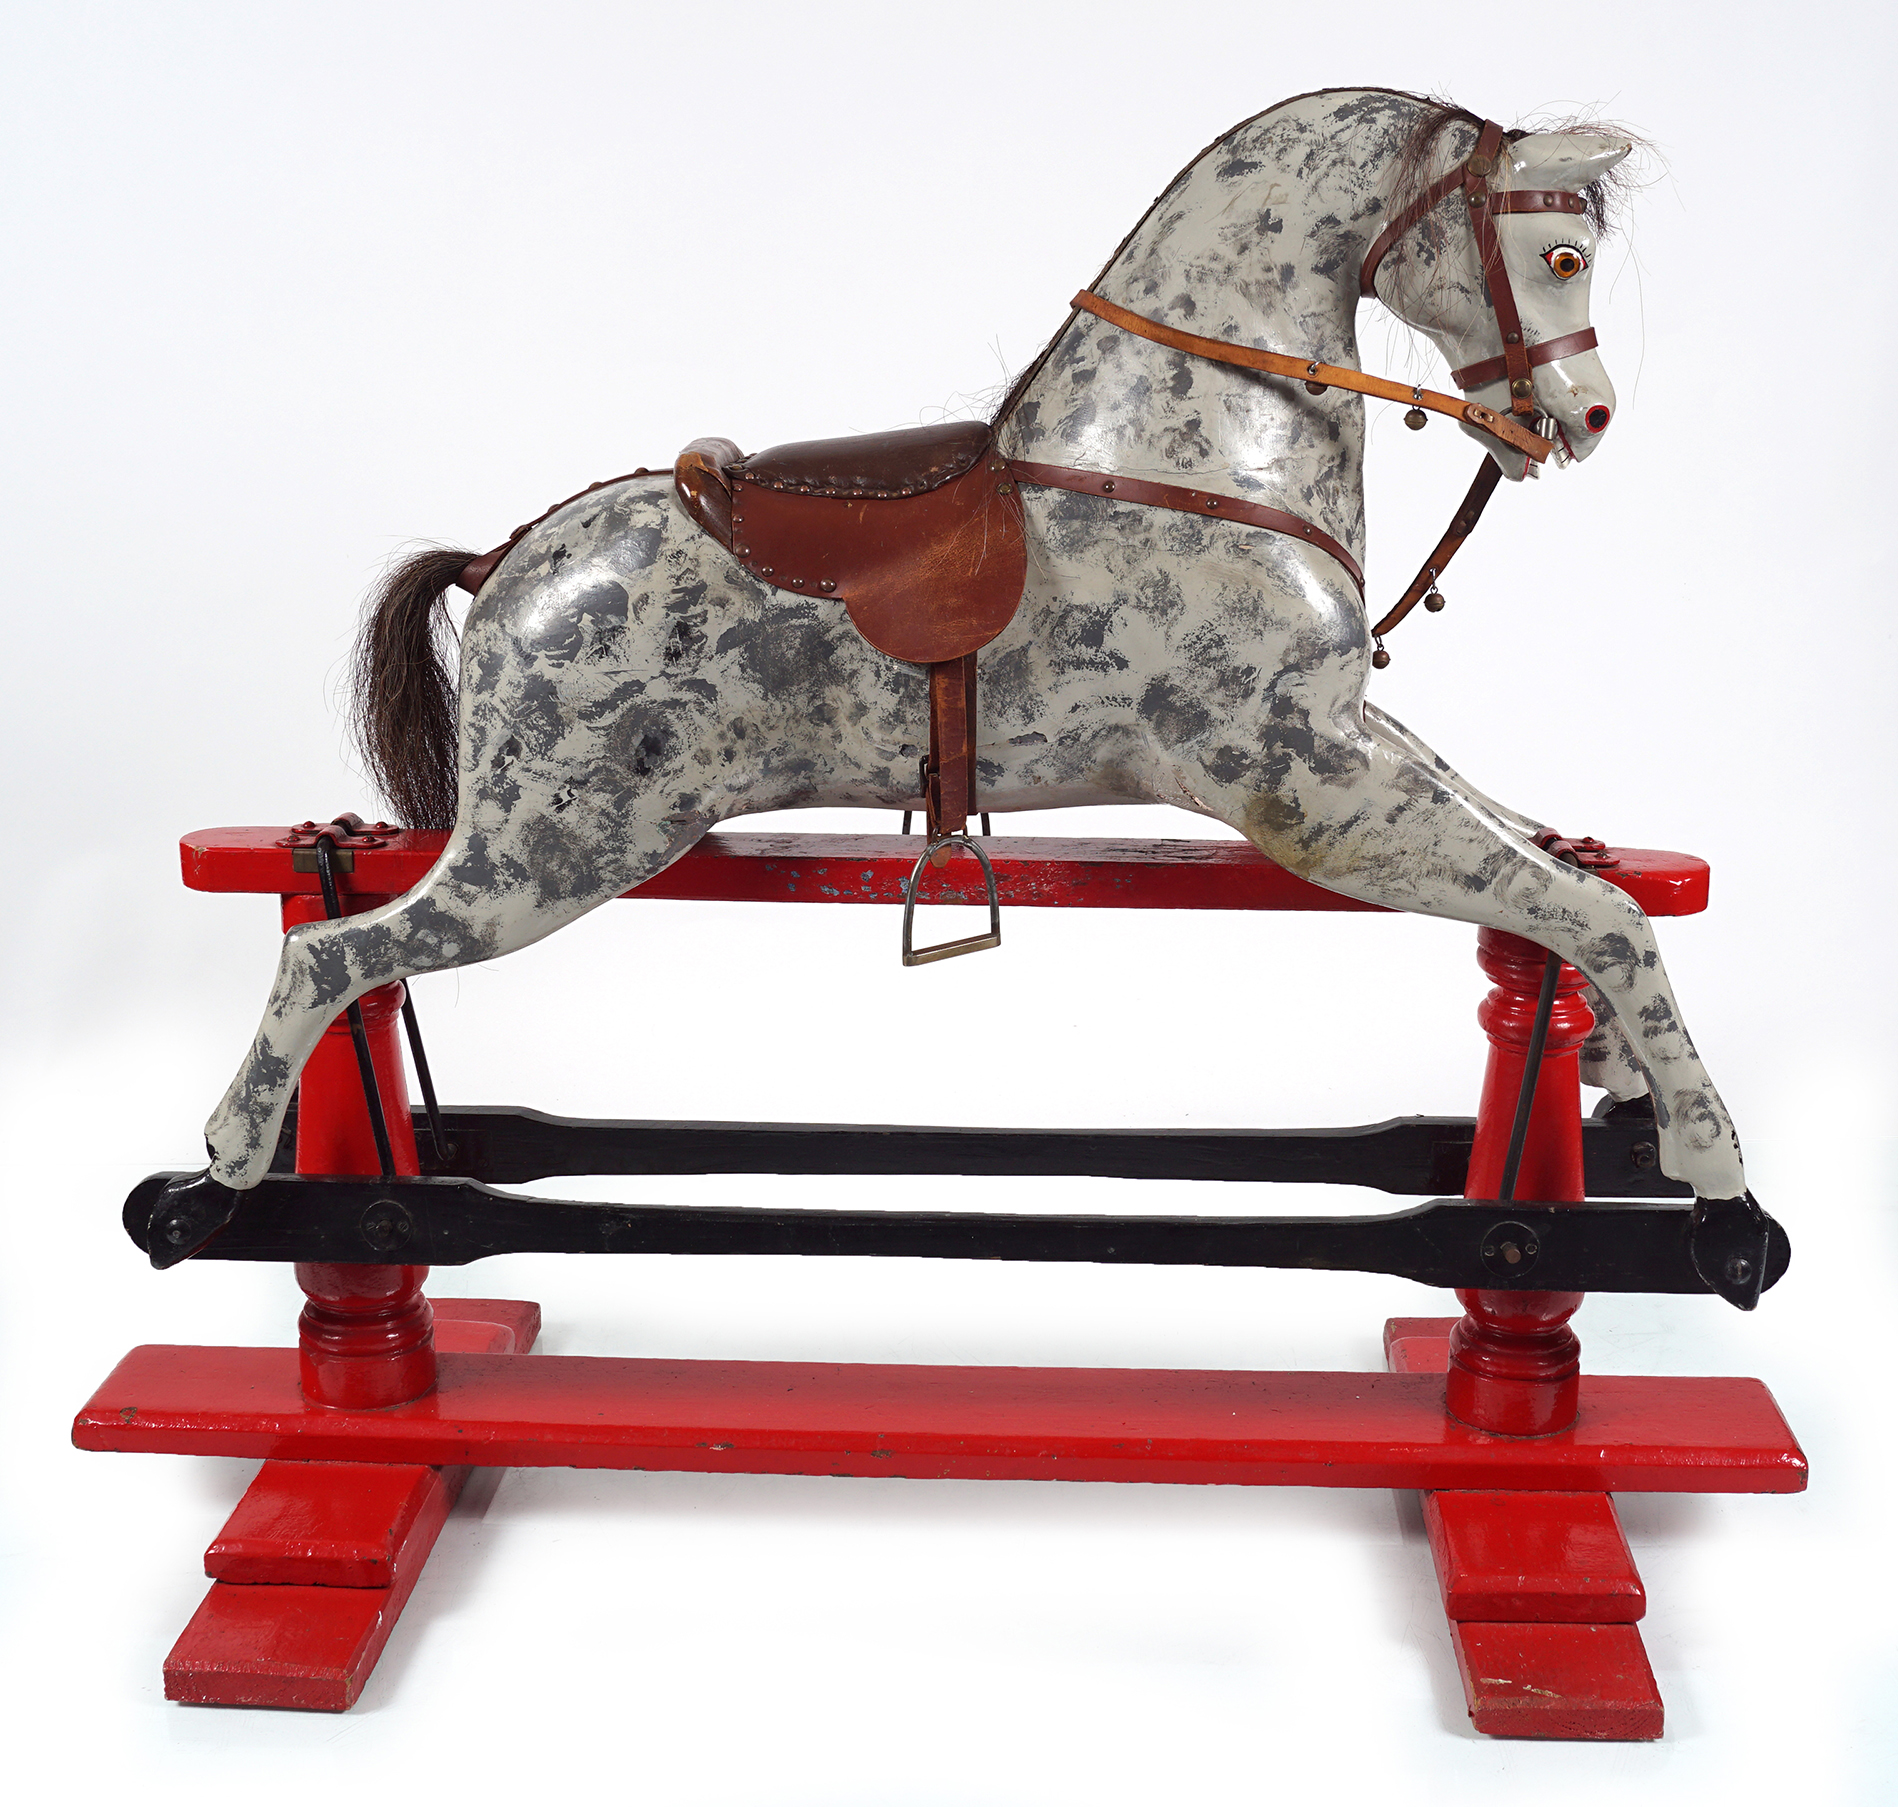 ANTIQUE POLYCHROME WOODEN ROCKING HORSE